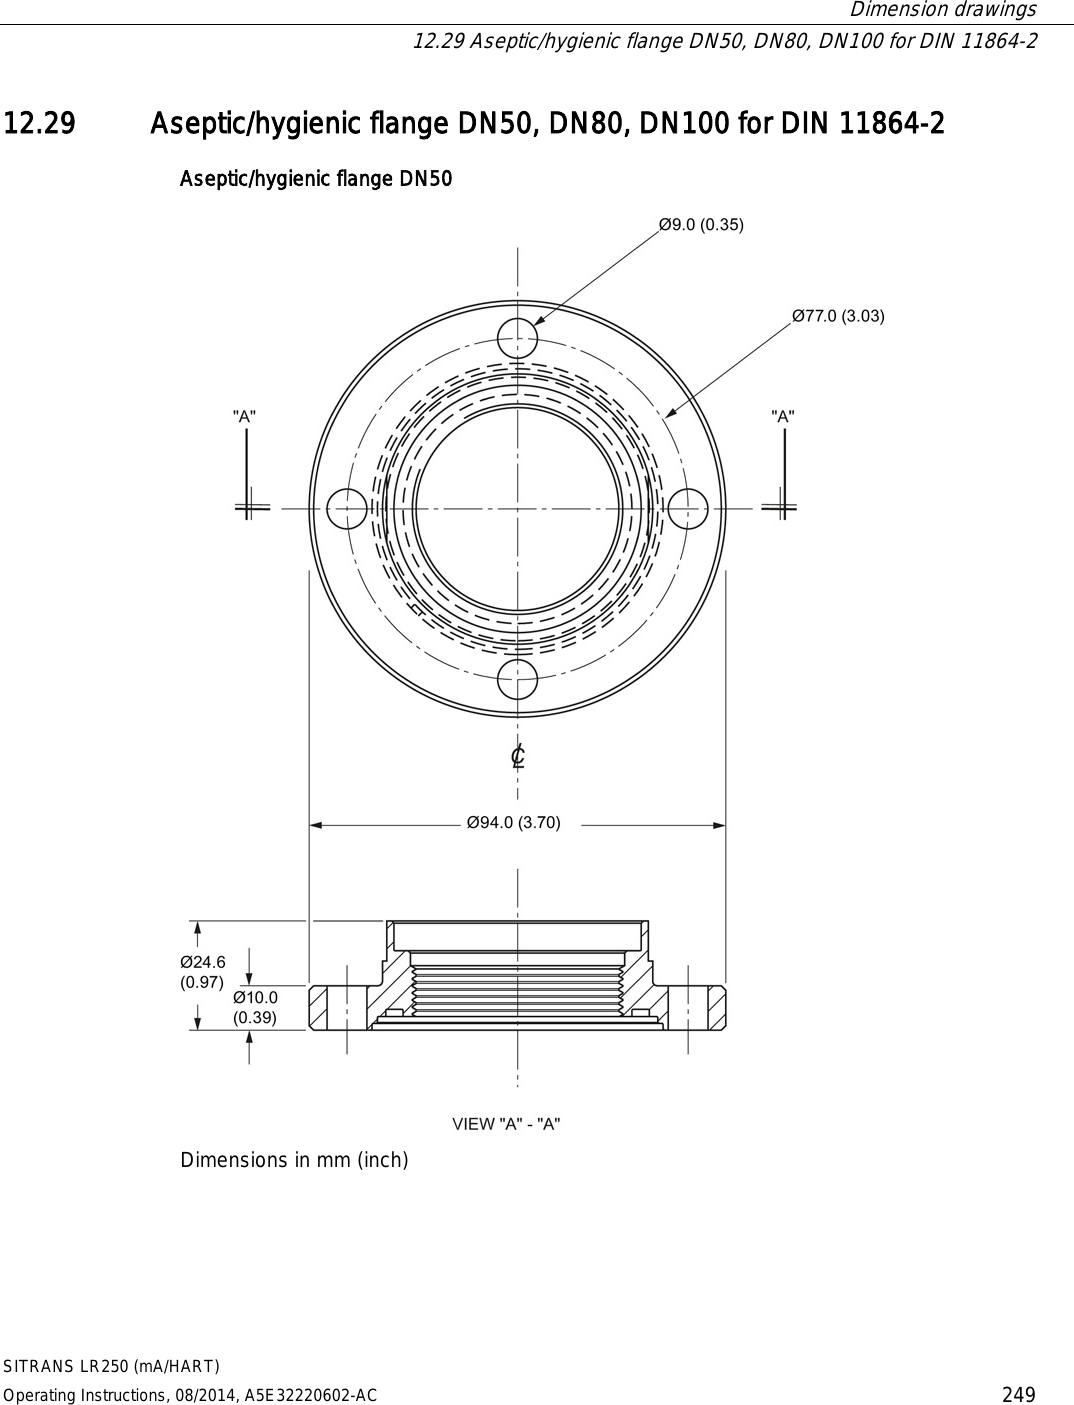  Dimension drawings  12.29 Aseptic/hygienic flange DN50, DN80, DN100 for DIN 11864-2 SITRANS LR250 (mA/HART) Operating Instructions, 08/2014, A5E32220602-AC 249 12.29 Aseptic/hygienic flange DN50, DN80, DN100 for DIN 11864-2 Aseptic/hygienic flange DN50  Dimensions in mm (inch) 